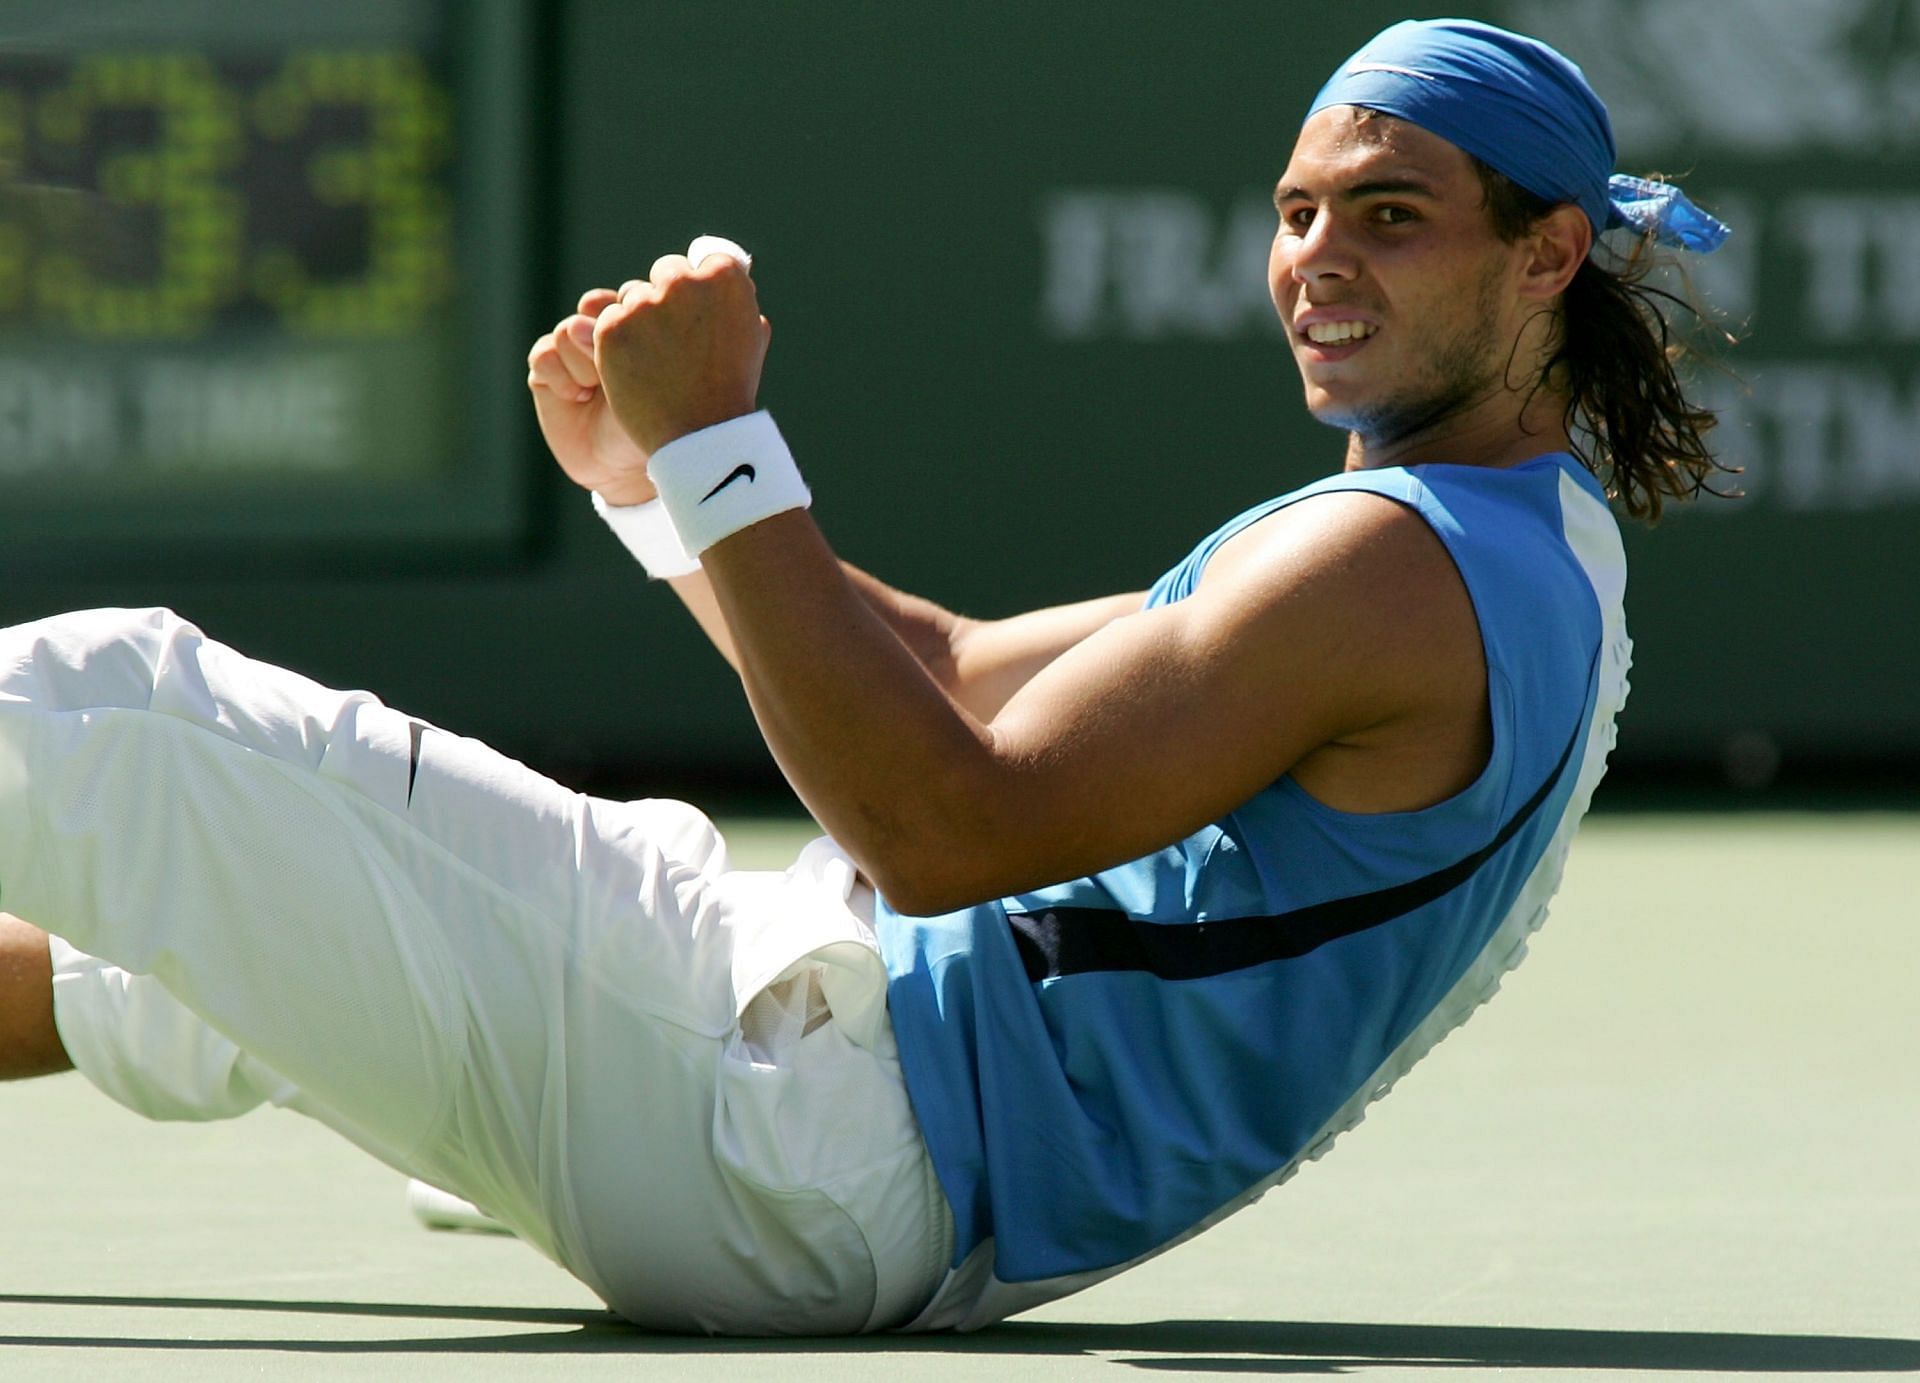 The Spaniard won his first title in Indian Wells in 2007.